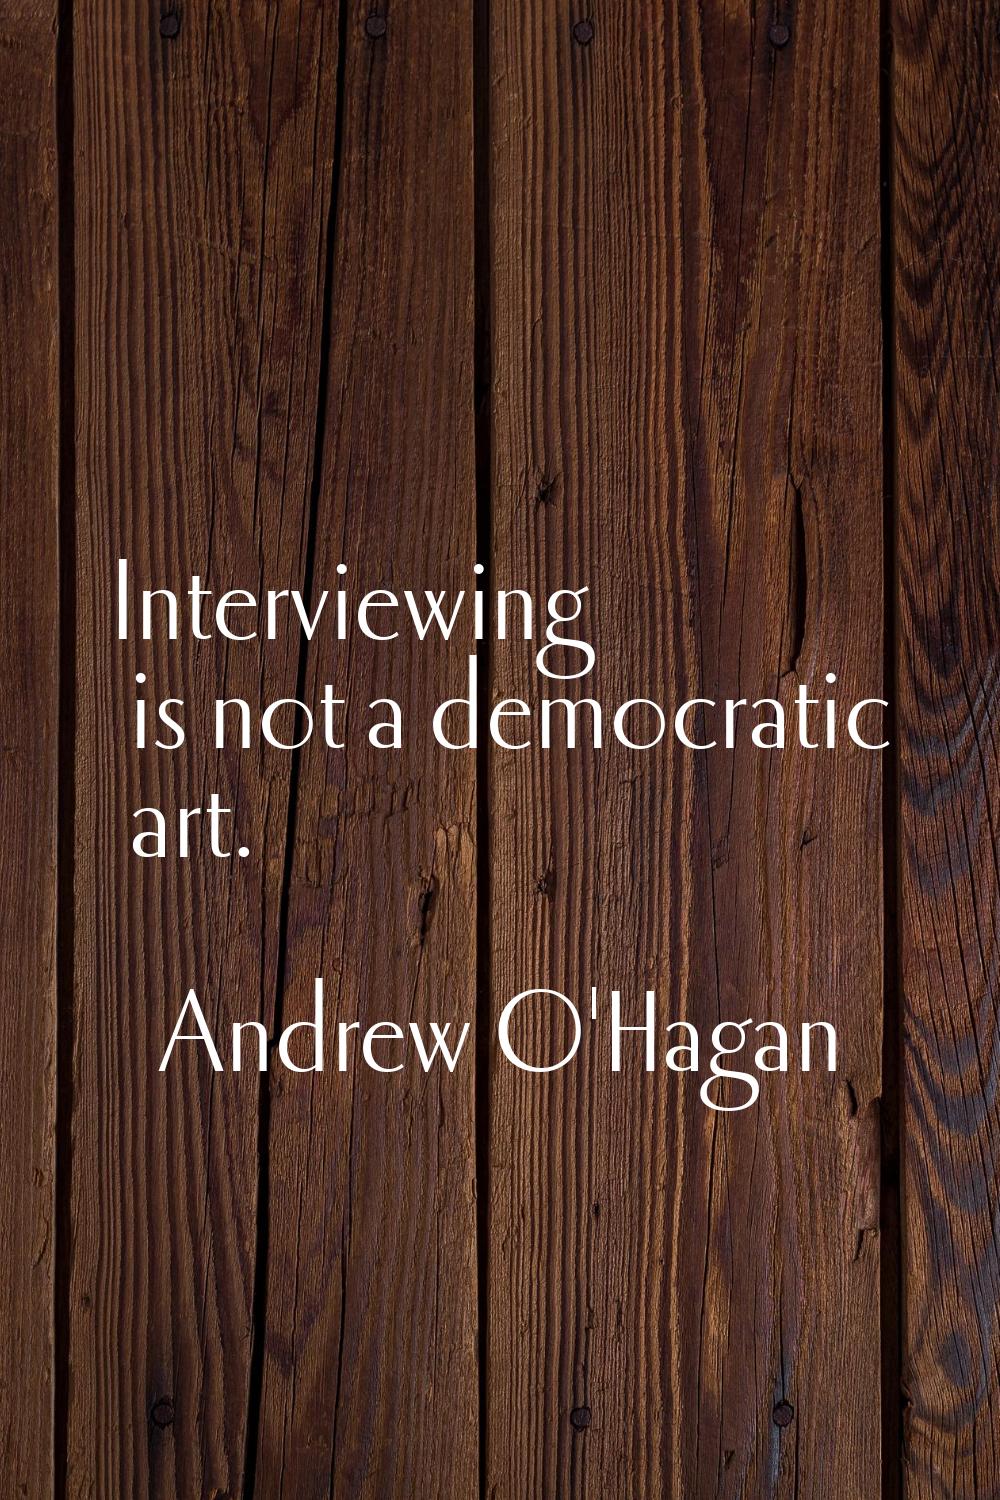 Interviewing is not a democratic art.